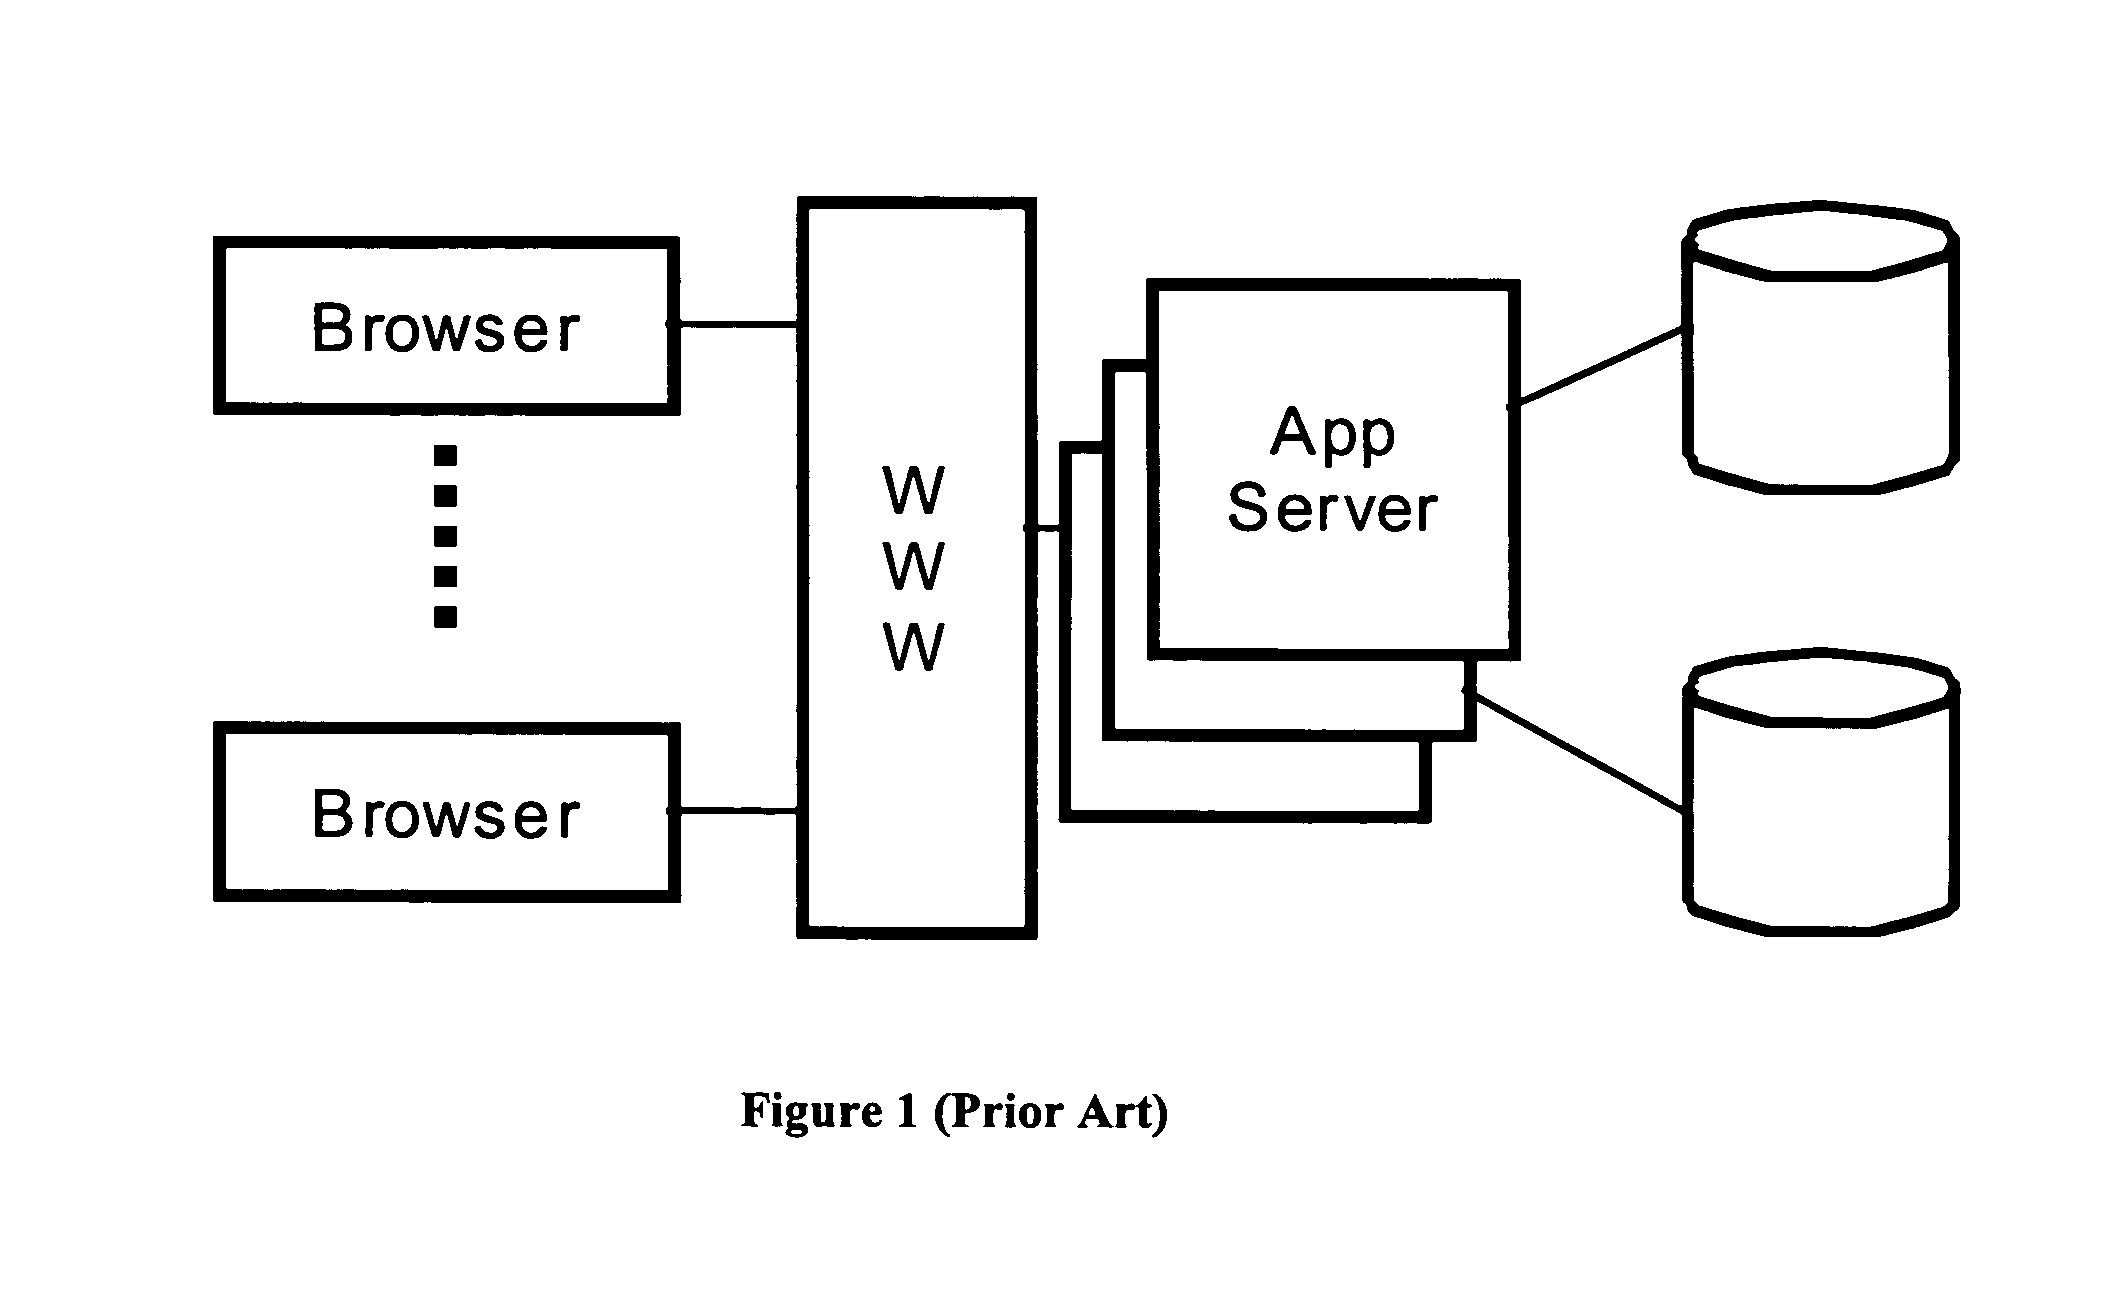 Method and apparatus for maintaining data integrity across distributed computer systems